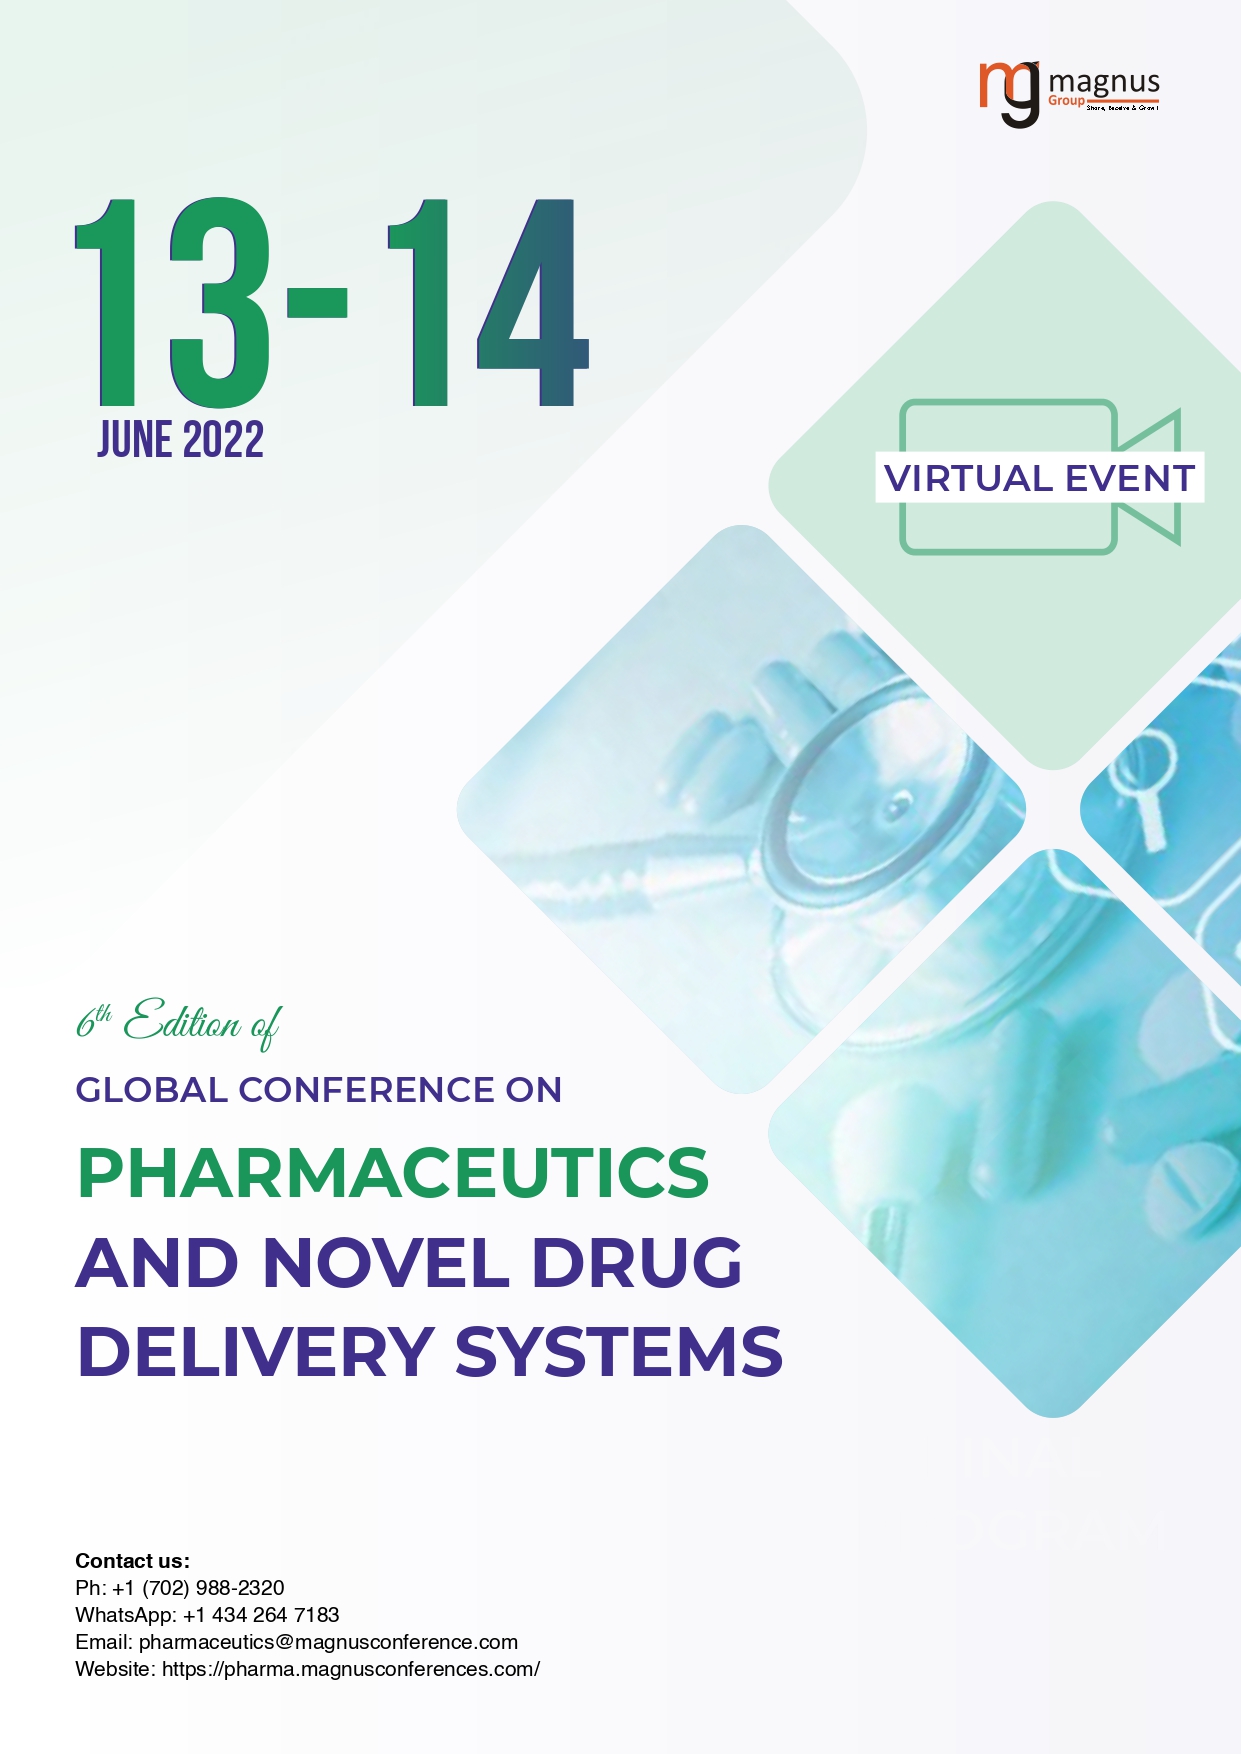 6th Edition of Global Conference on Pharmaceutics and Drug Delivery Systems Program